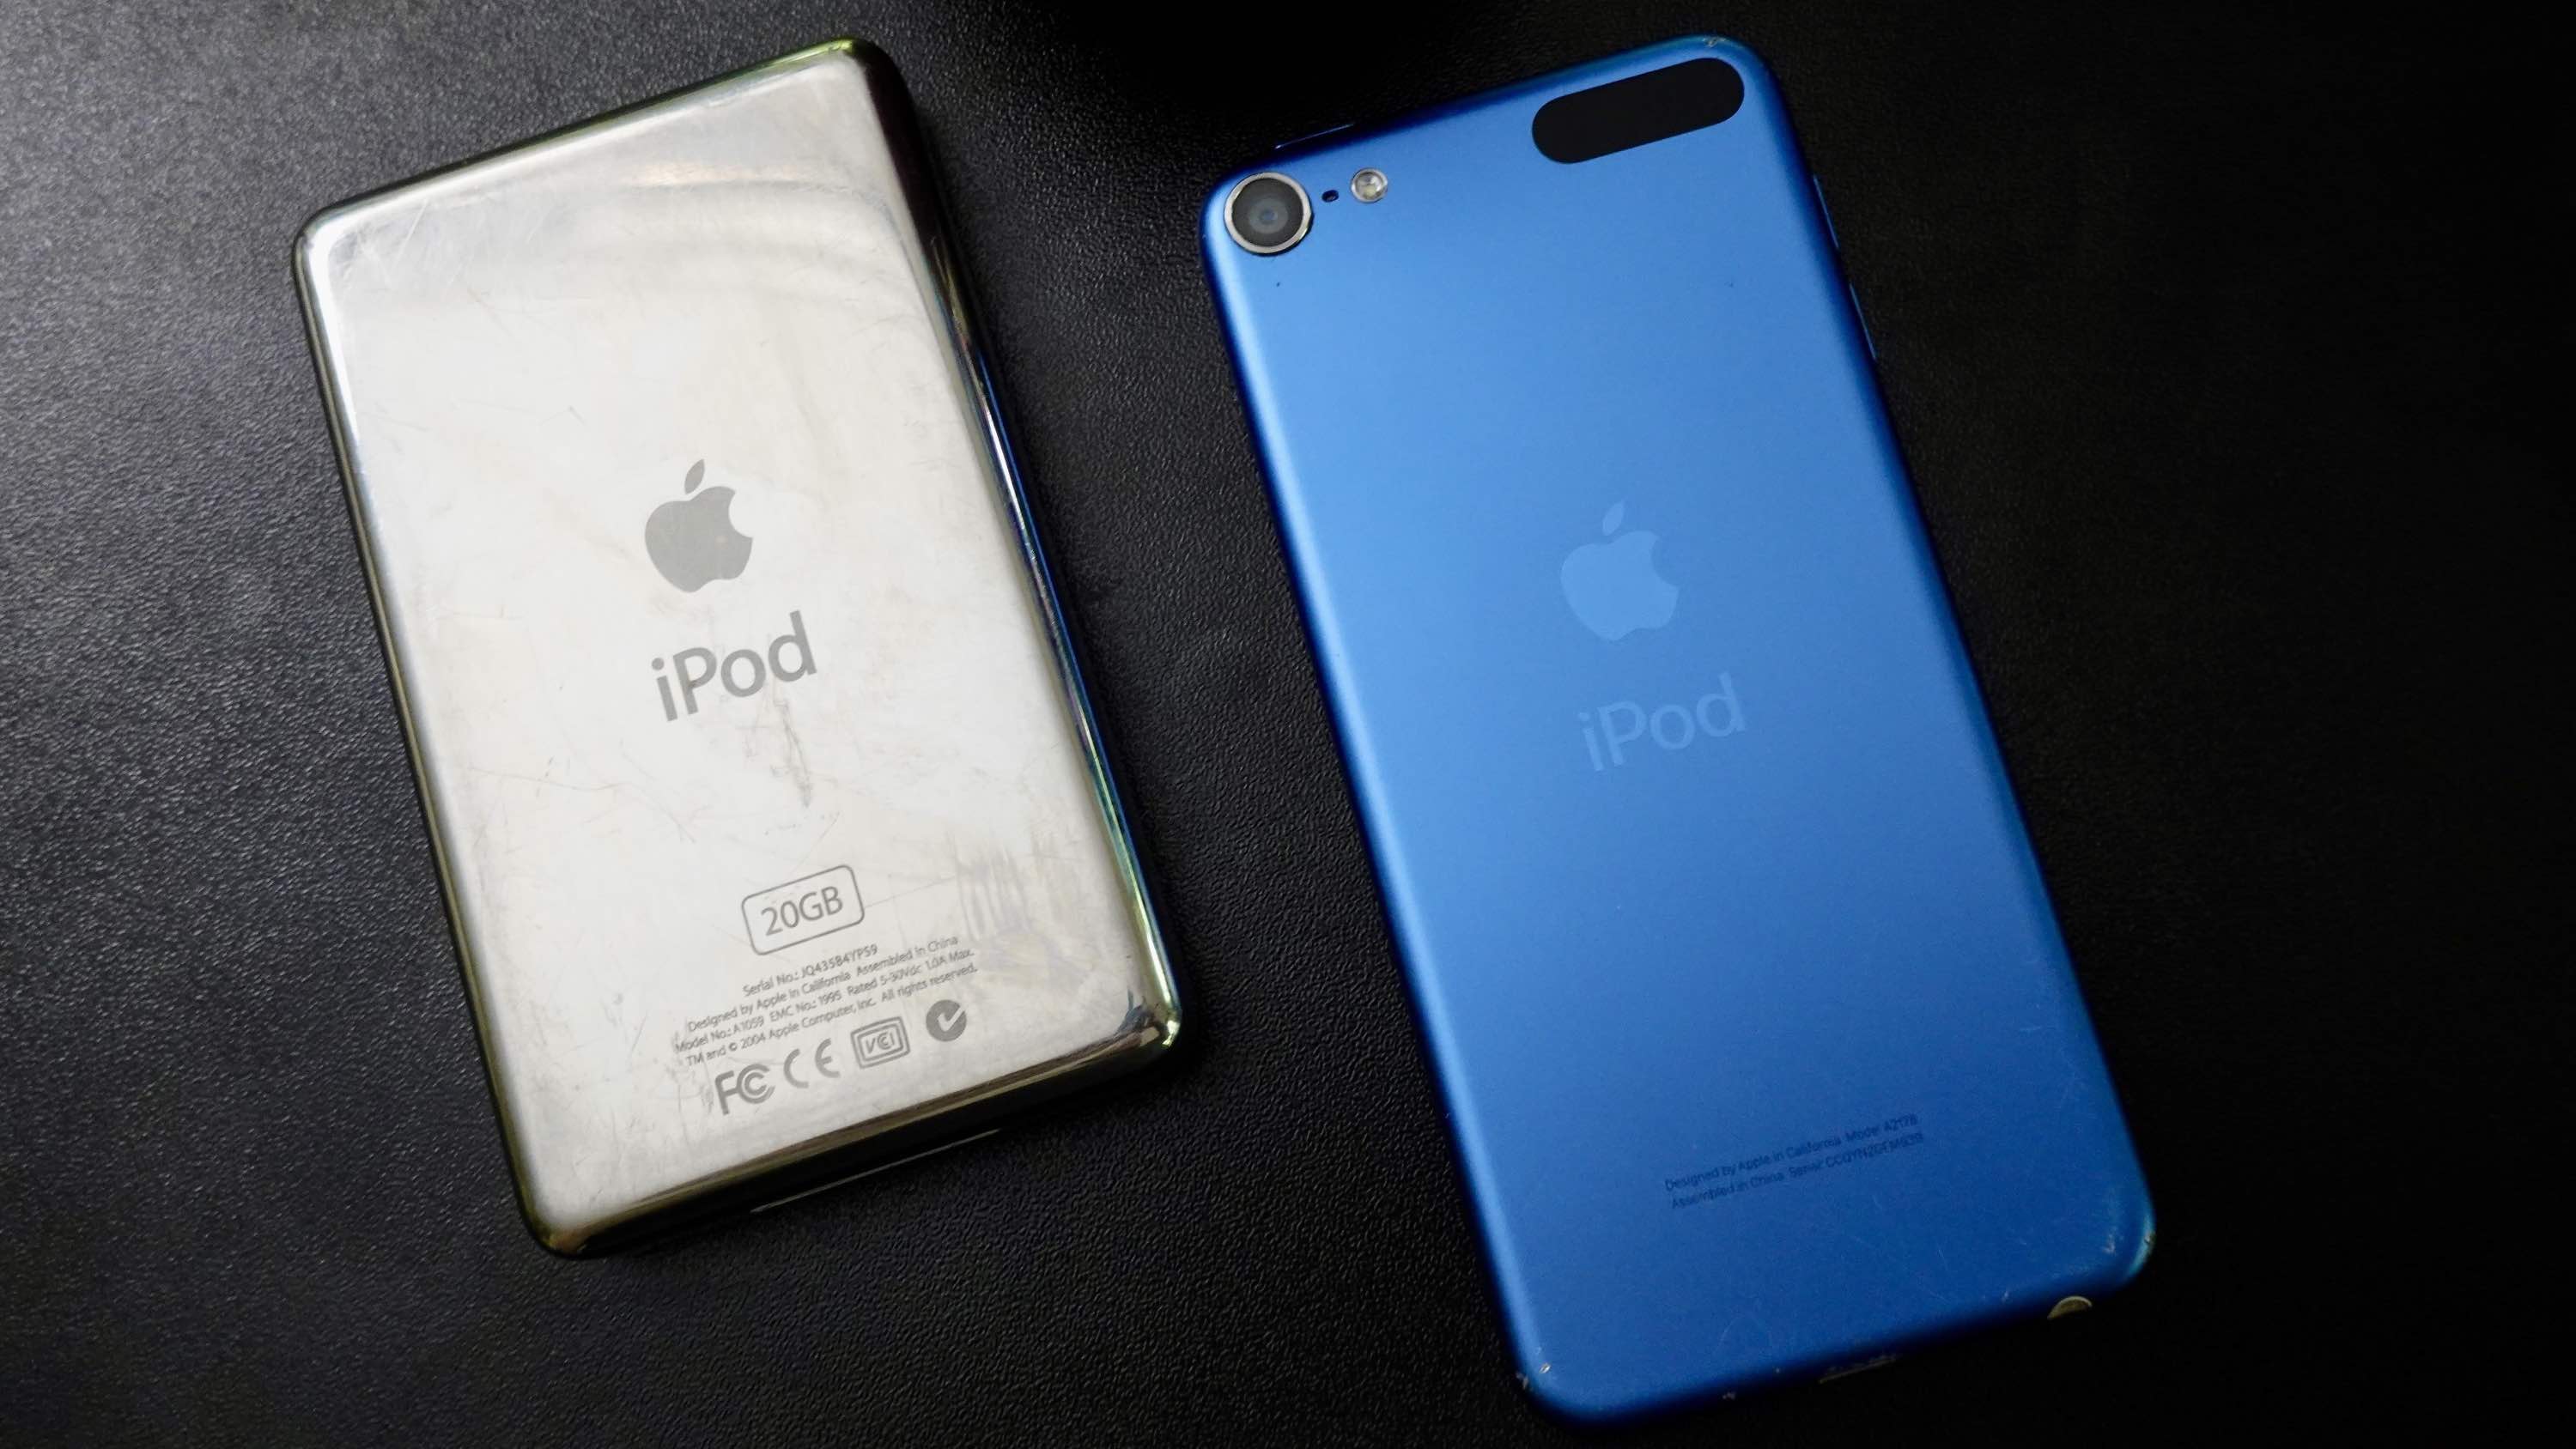 The iPod touch and 